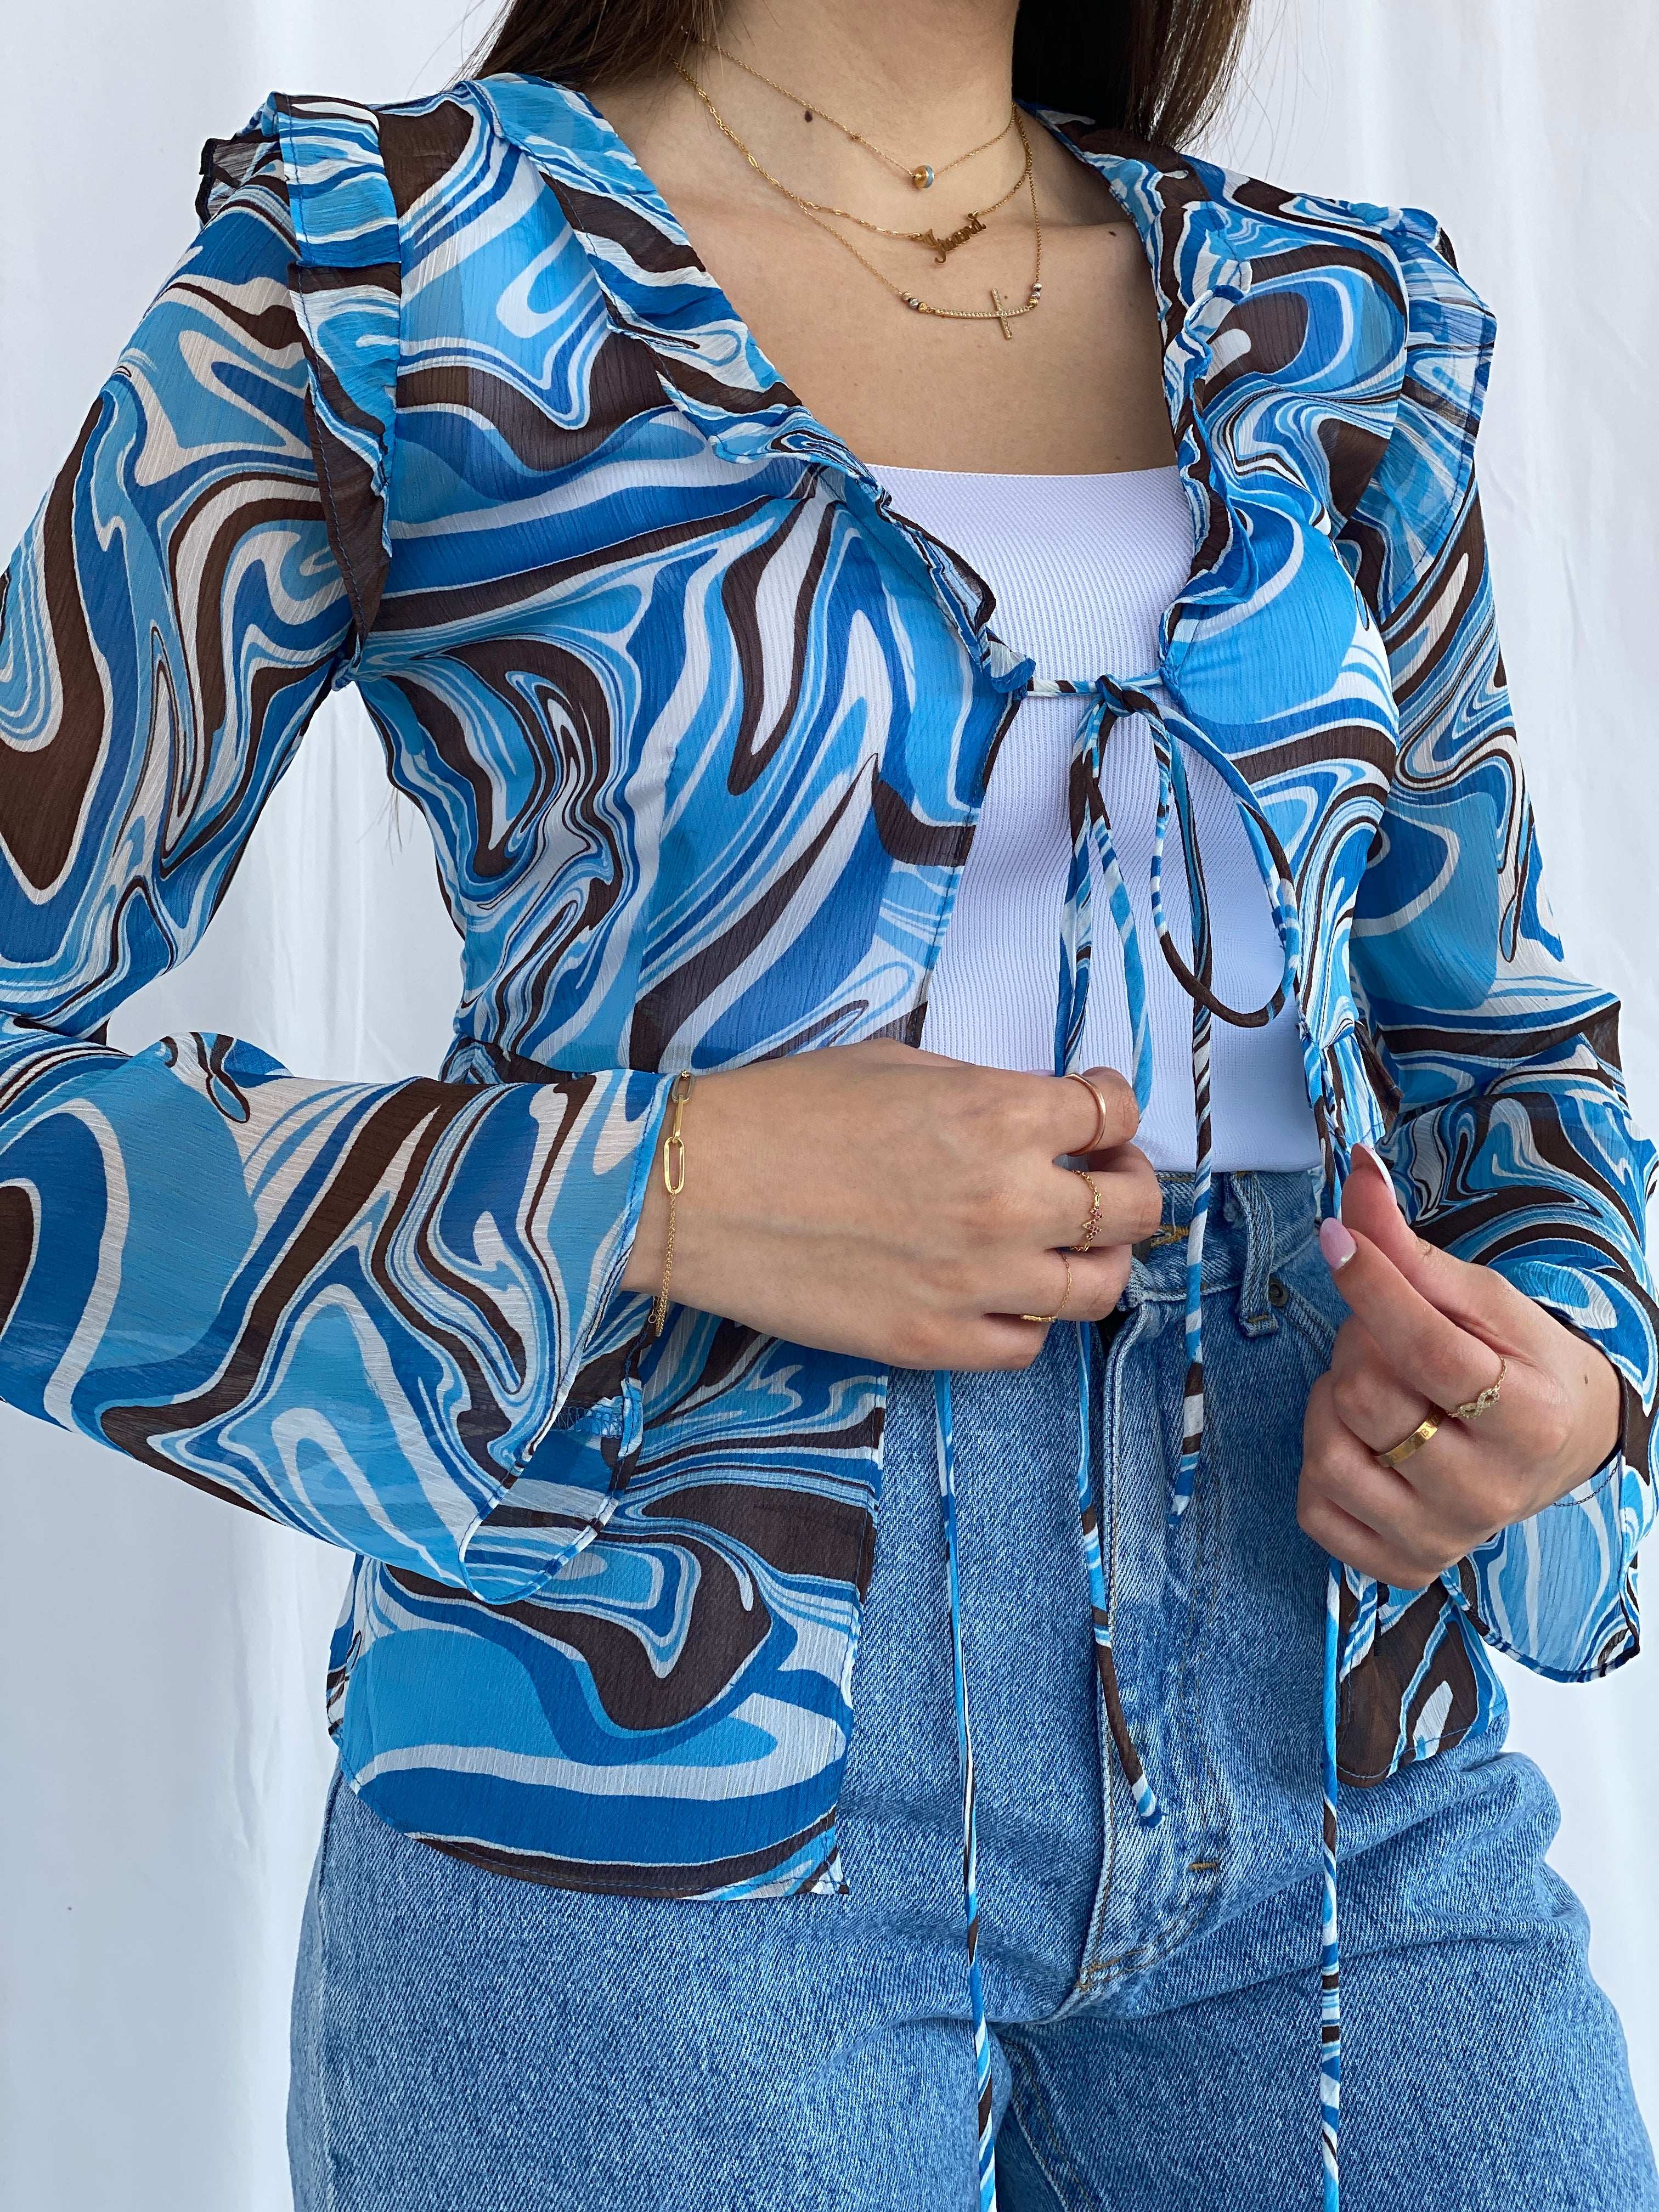 Groovy Blue and Brown Pomelo Sheer Cardigan Size S - Balagan Vintage Cardigan cardigan, full sleeve shirt, groovy, groovy print, groovy shirt, Juana, NEW IN, women skirt